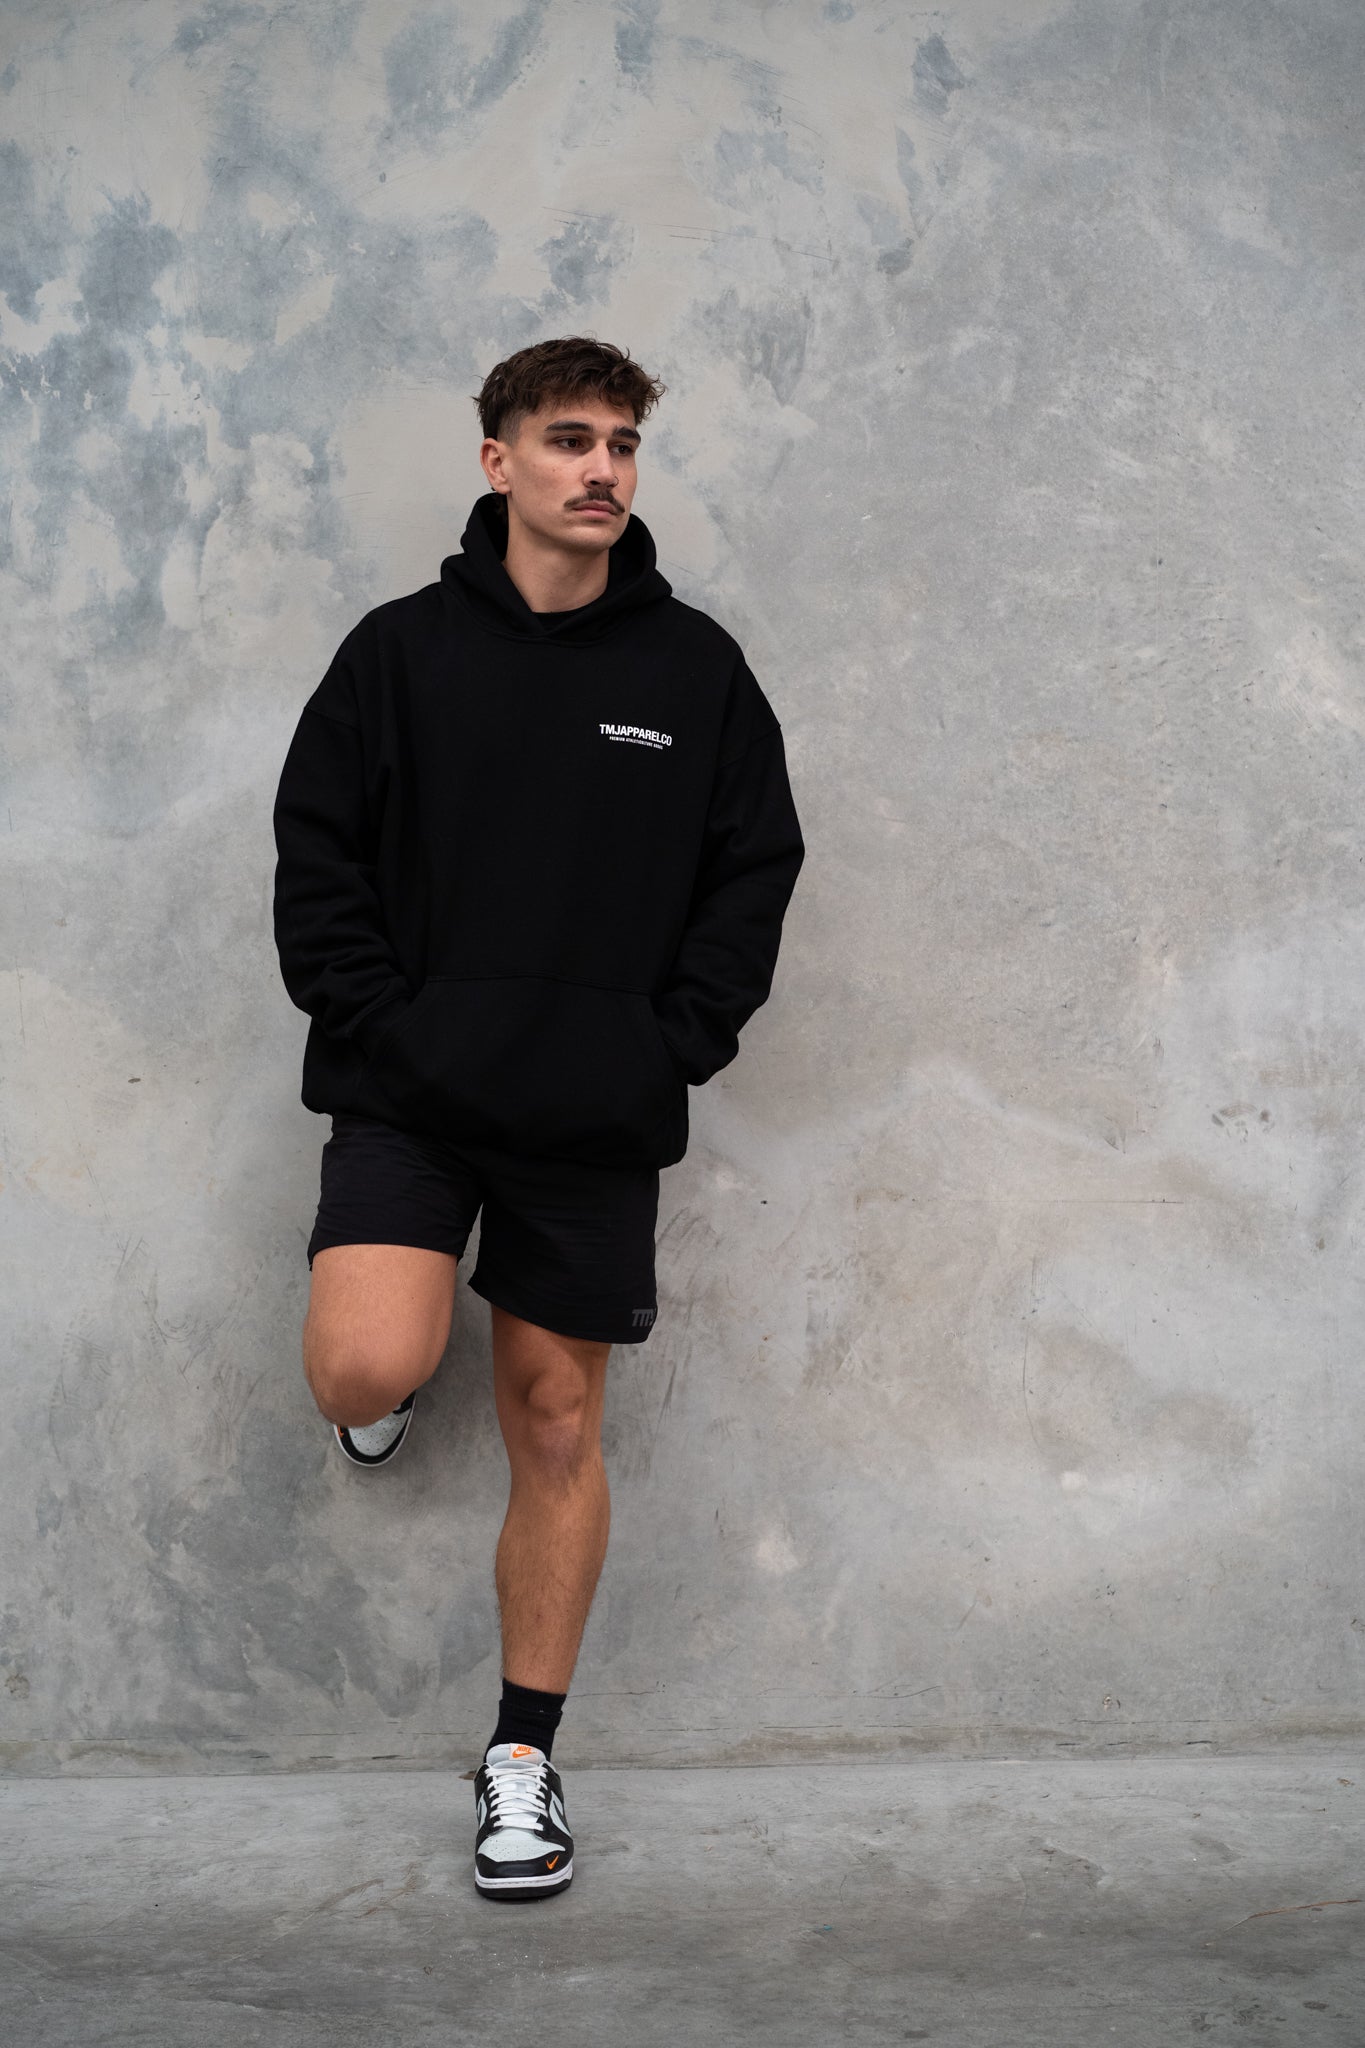 Male wearing TMJ Apparel Athleticulture Hoodie in Black showing the front of the hoodie with white text saying TMJAPPARELCO Premium Athleticulture Goods on left of chest.